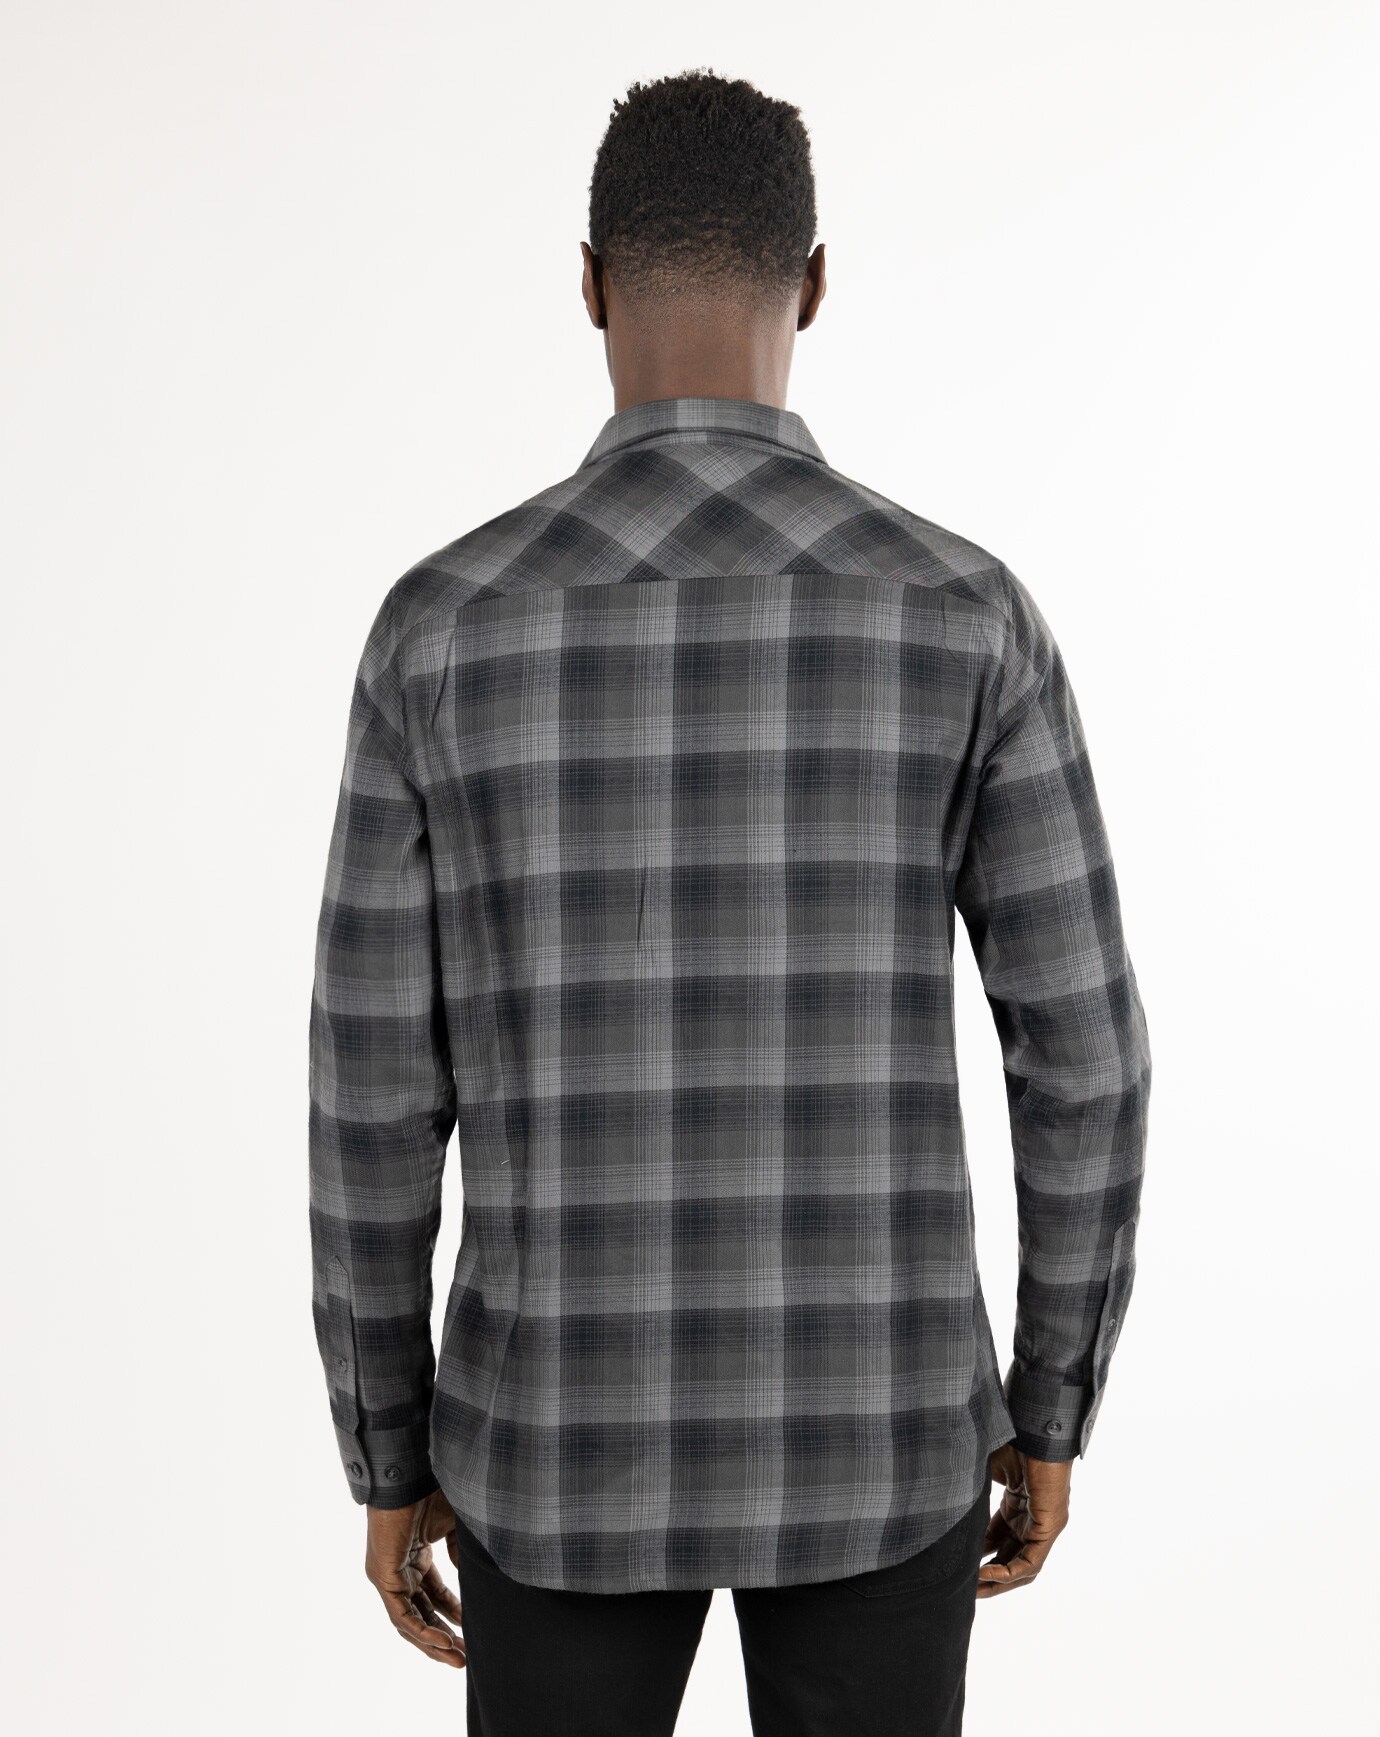 INLAND BUTTON-UP Image 3